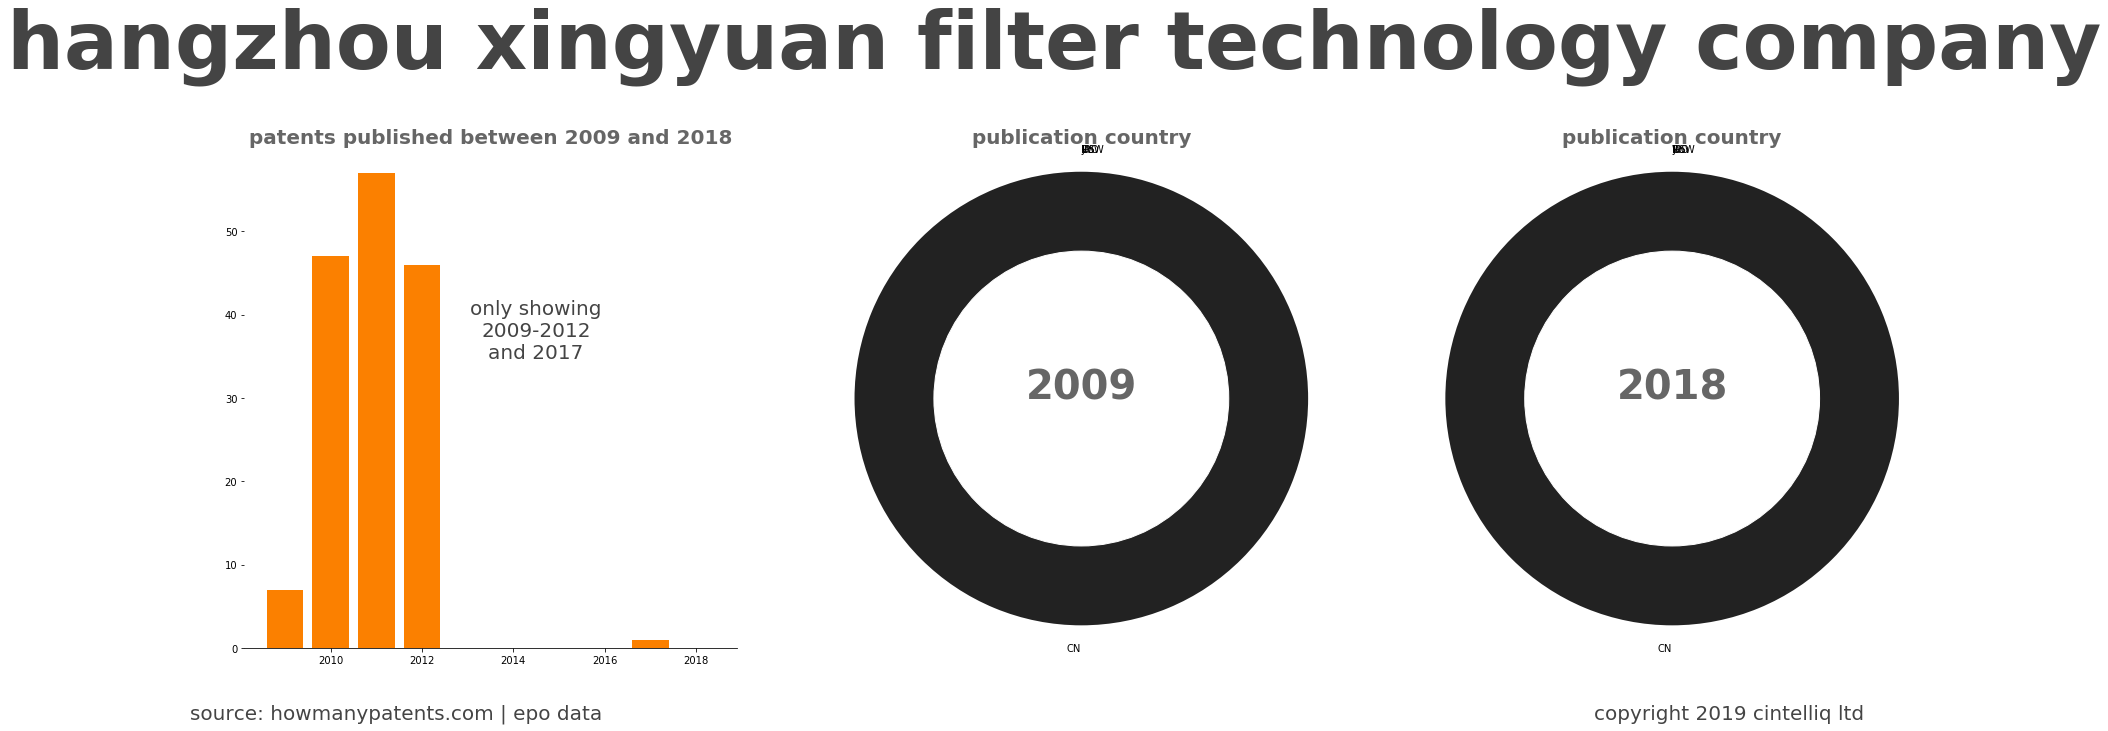 summary of patents for Hangzhou Xingyuan Filter Technology Company